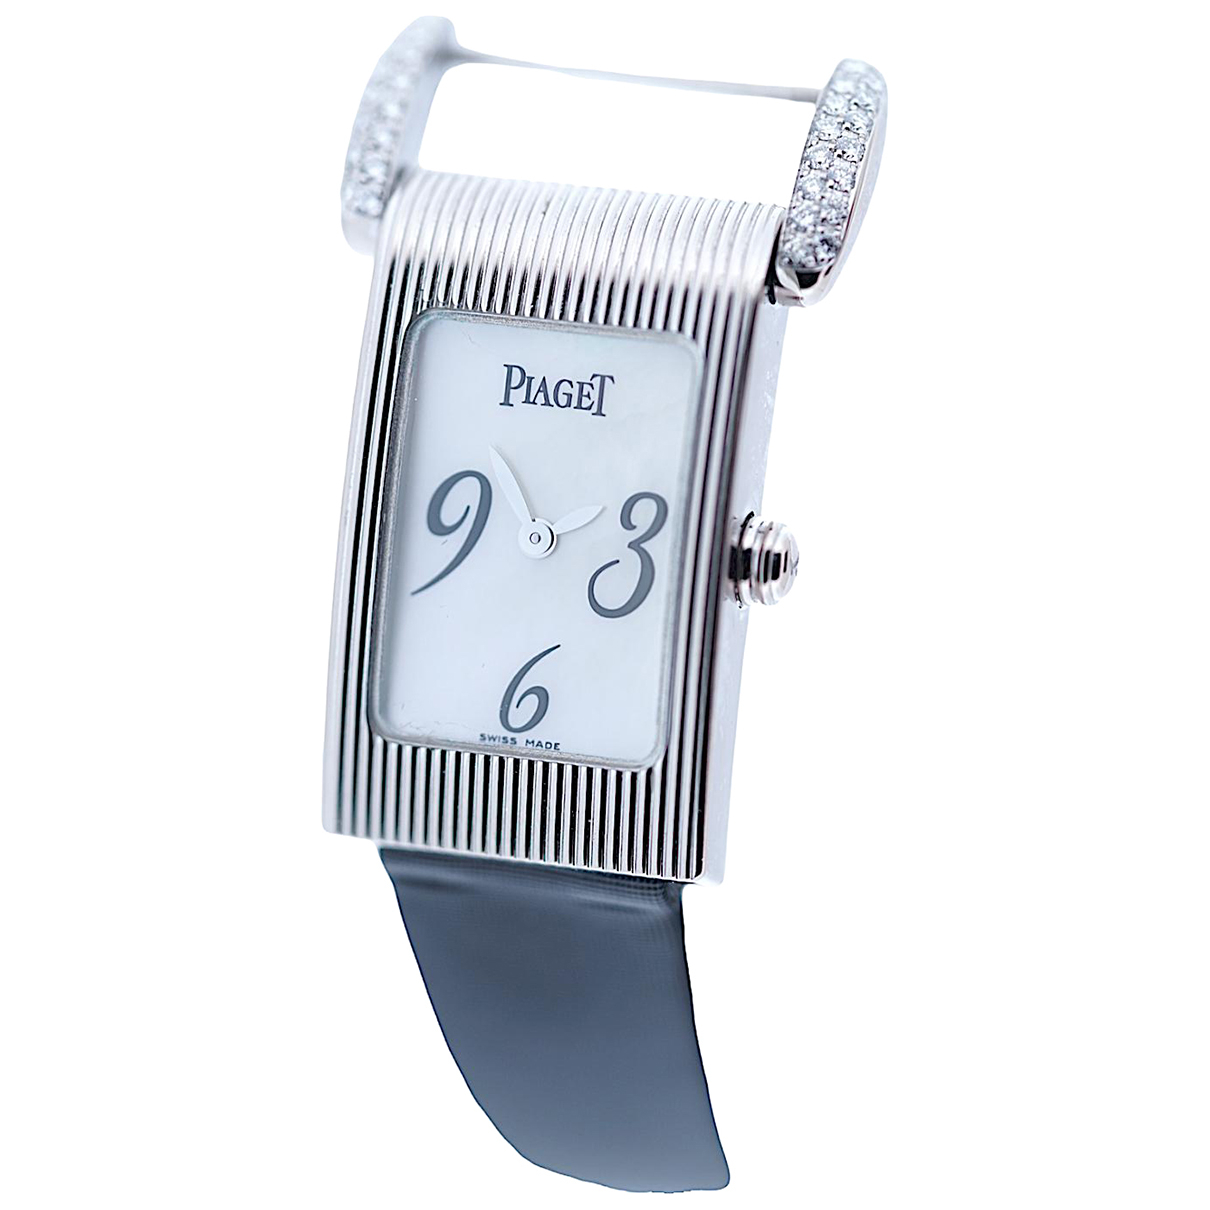 image of Piaget Protocole white gold watch